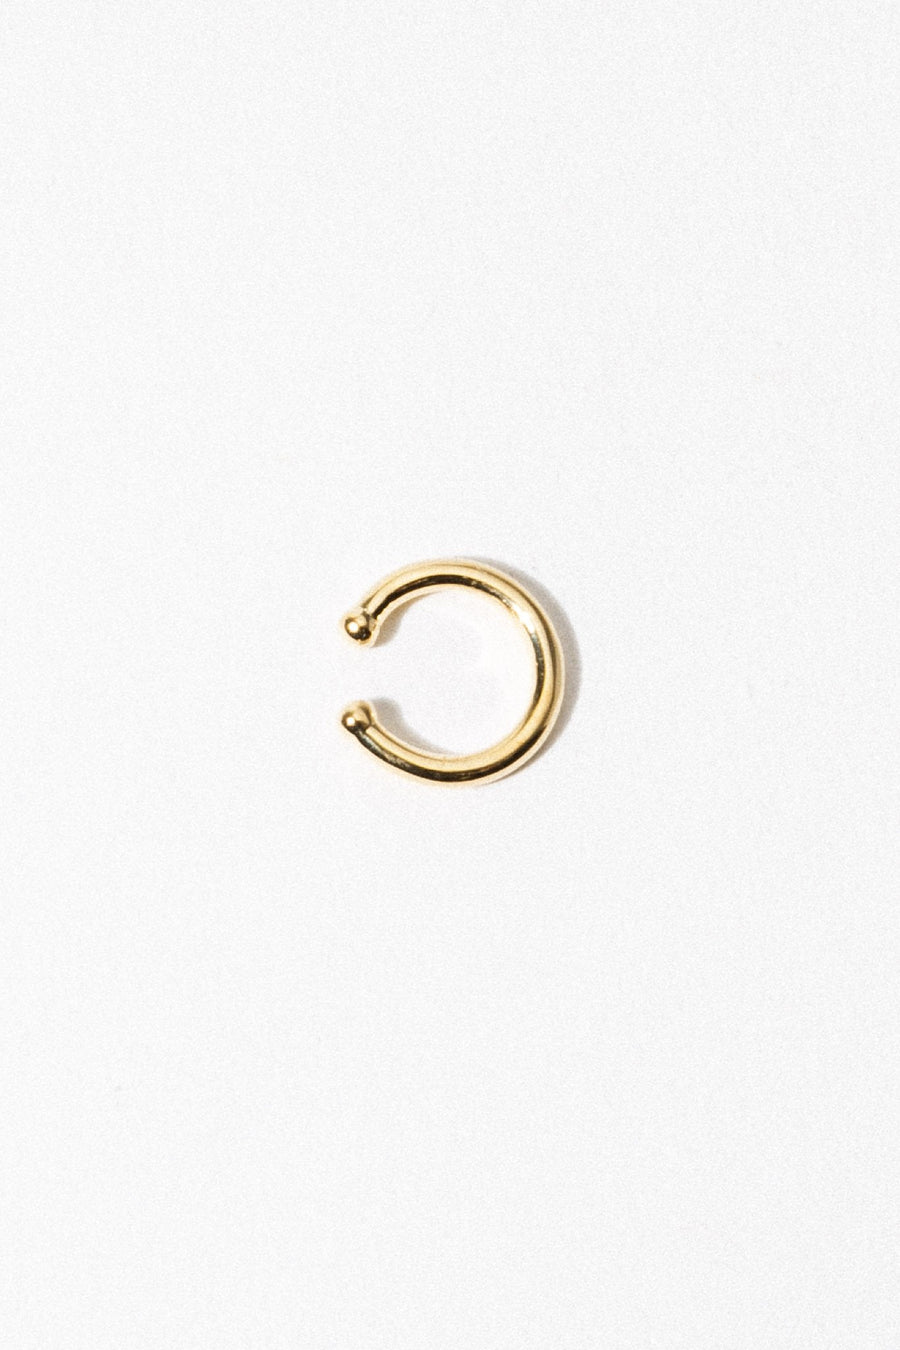 Wildthings Collectables Jewelry Gold Classic Earcuff